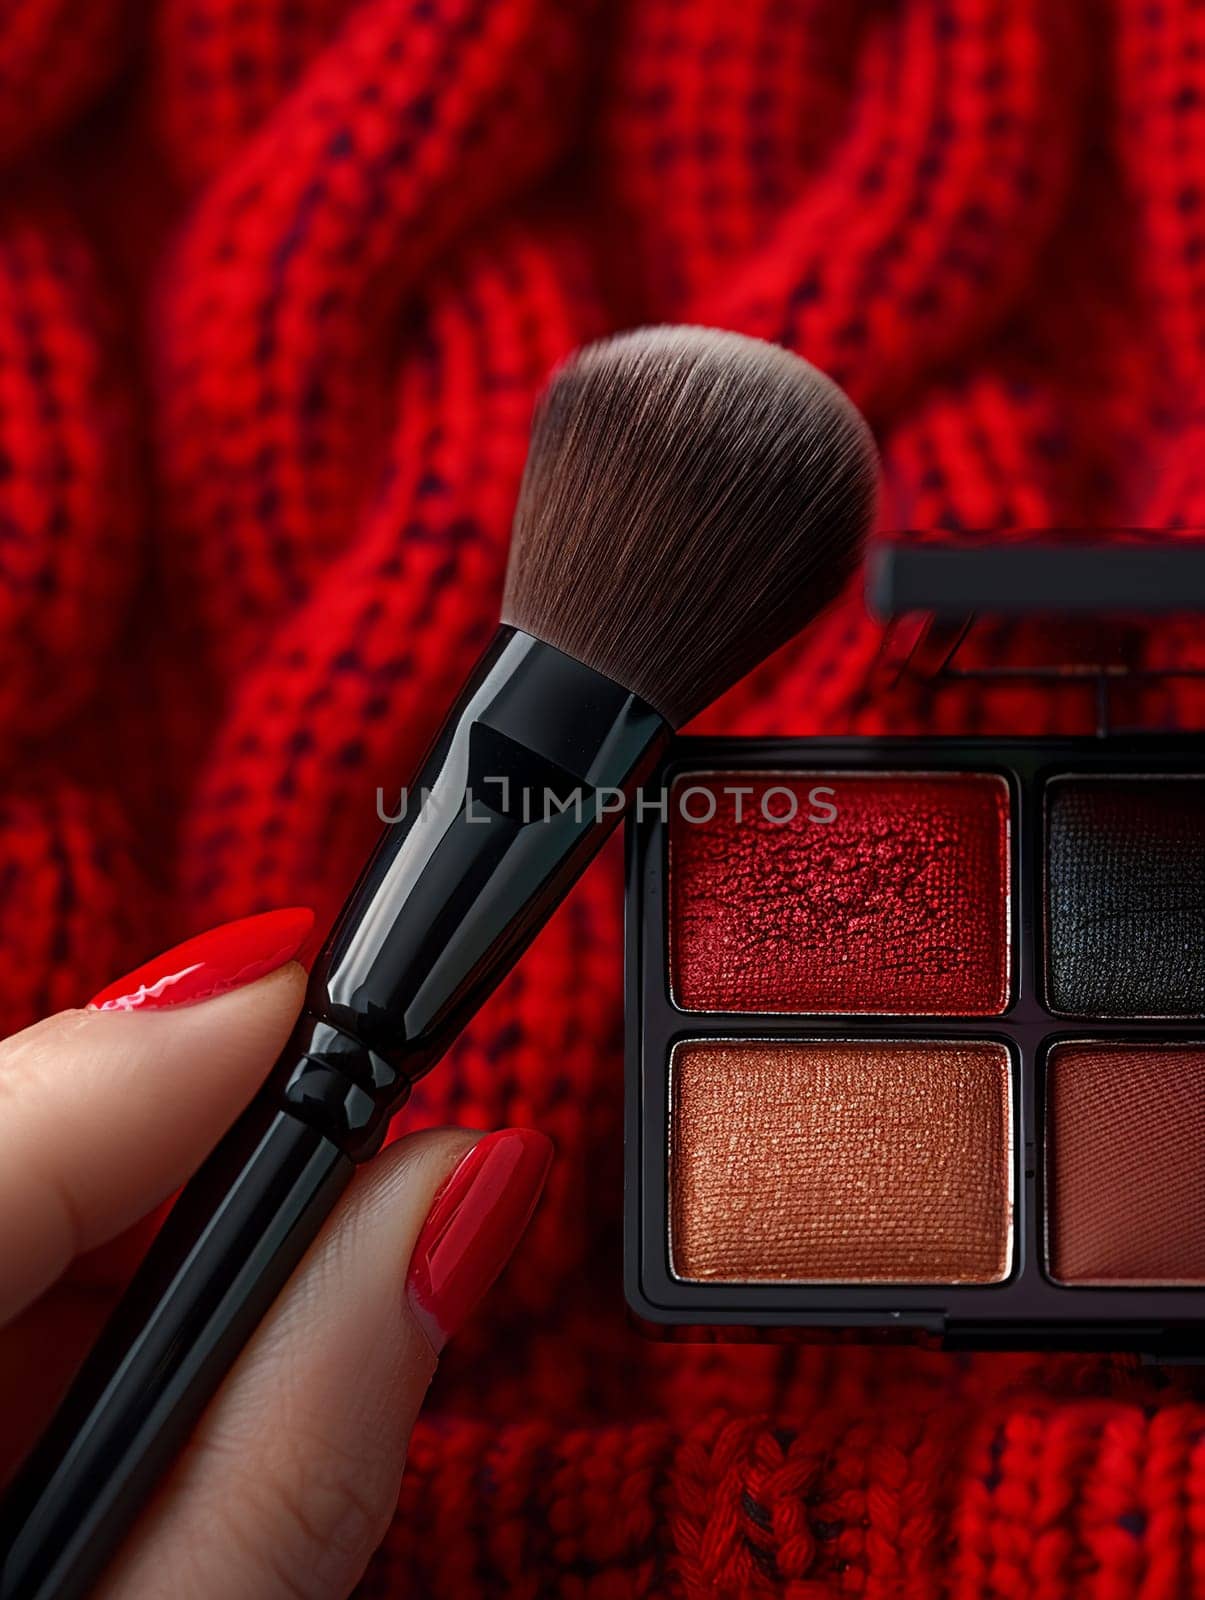 Fingers gently holding a makeup brush against a palette, symbolizing beauty routine.